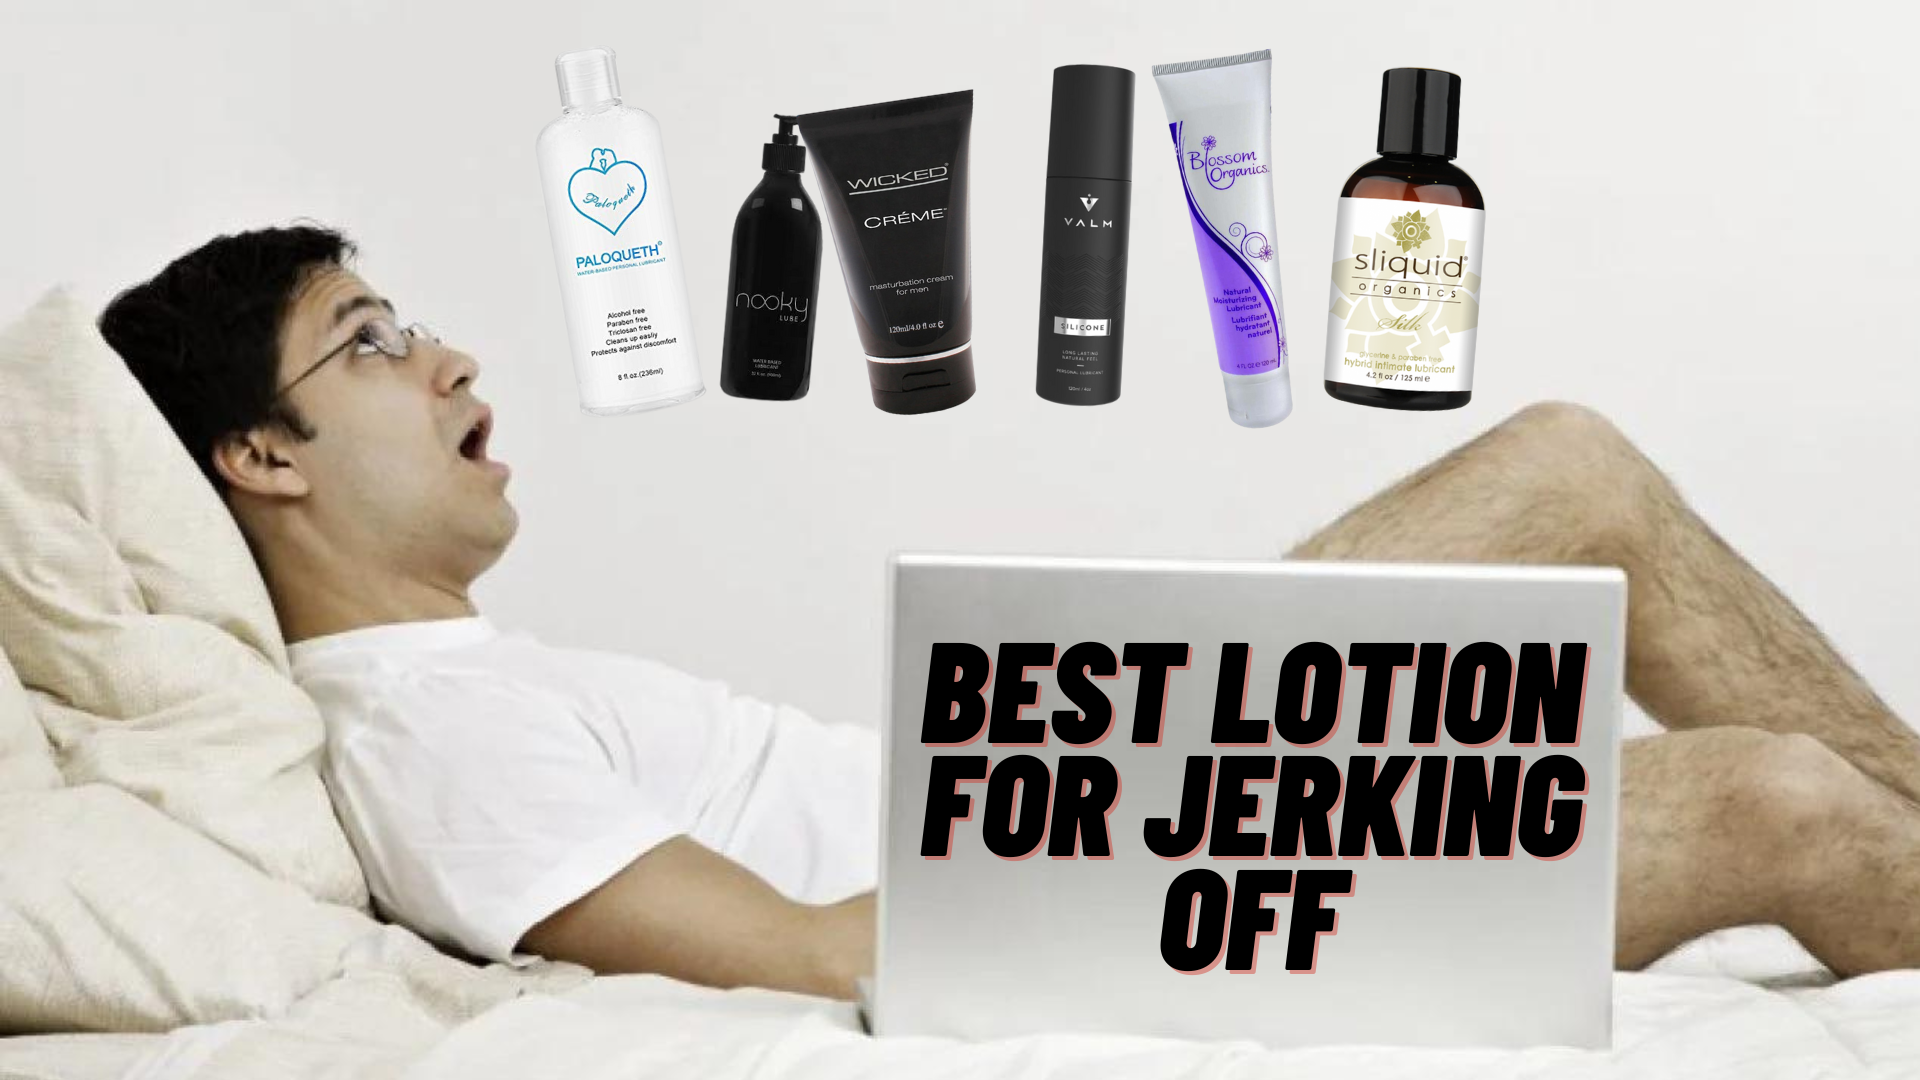 A man lying on the bed while masturbating with a laptop beside him and some lotion brands on top